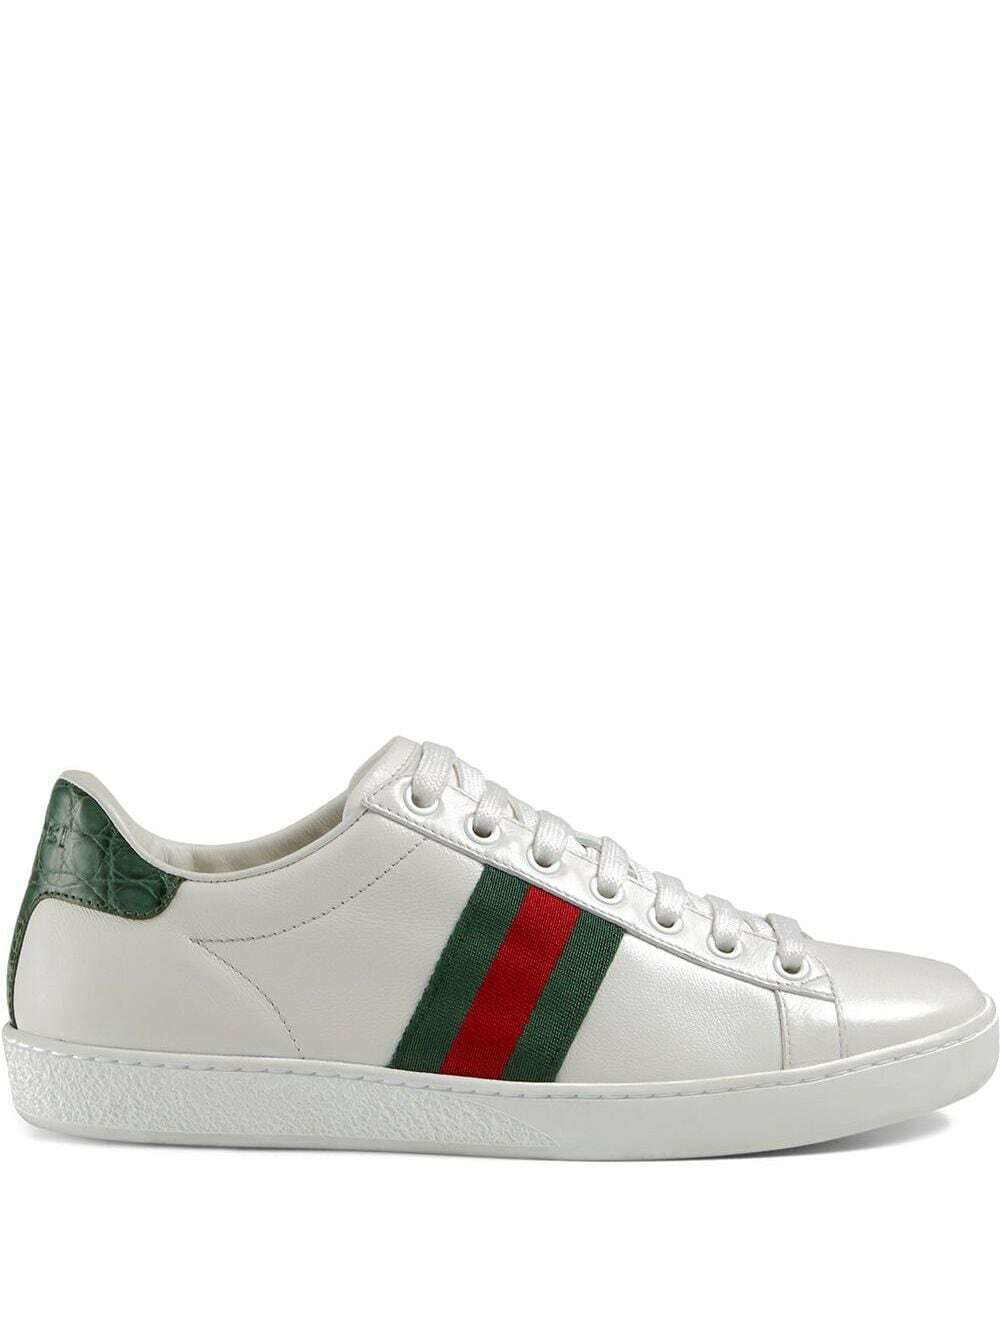 GUCCI - Ace Leather Sneakers Gucci